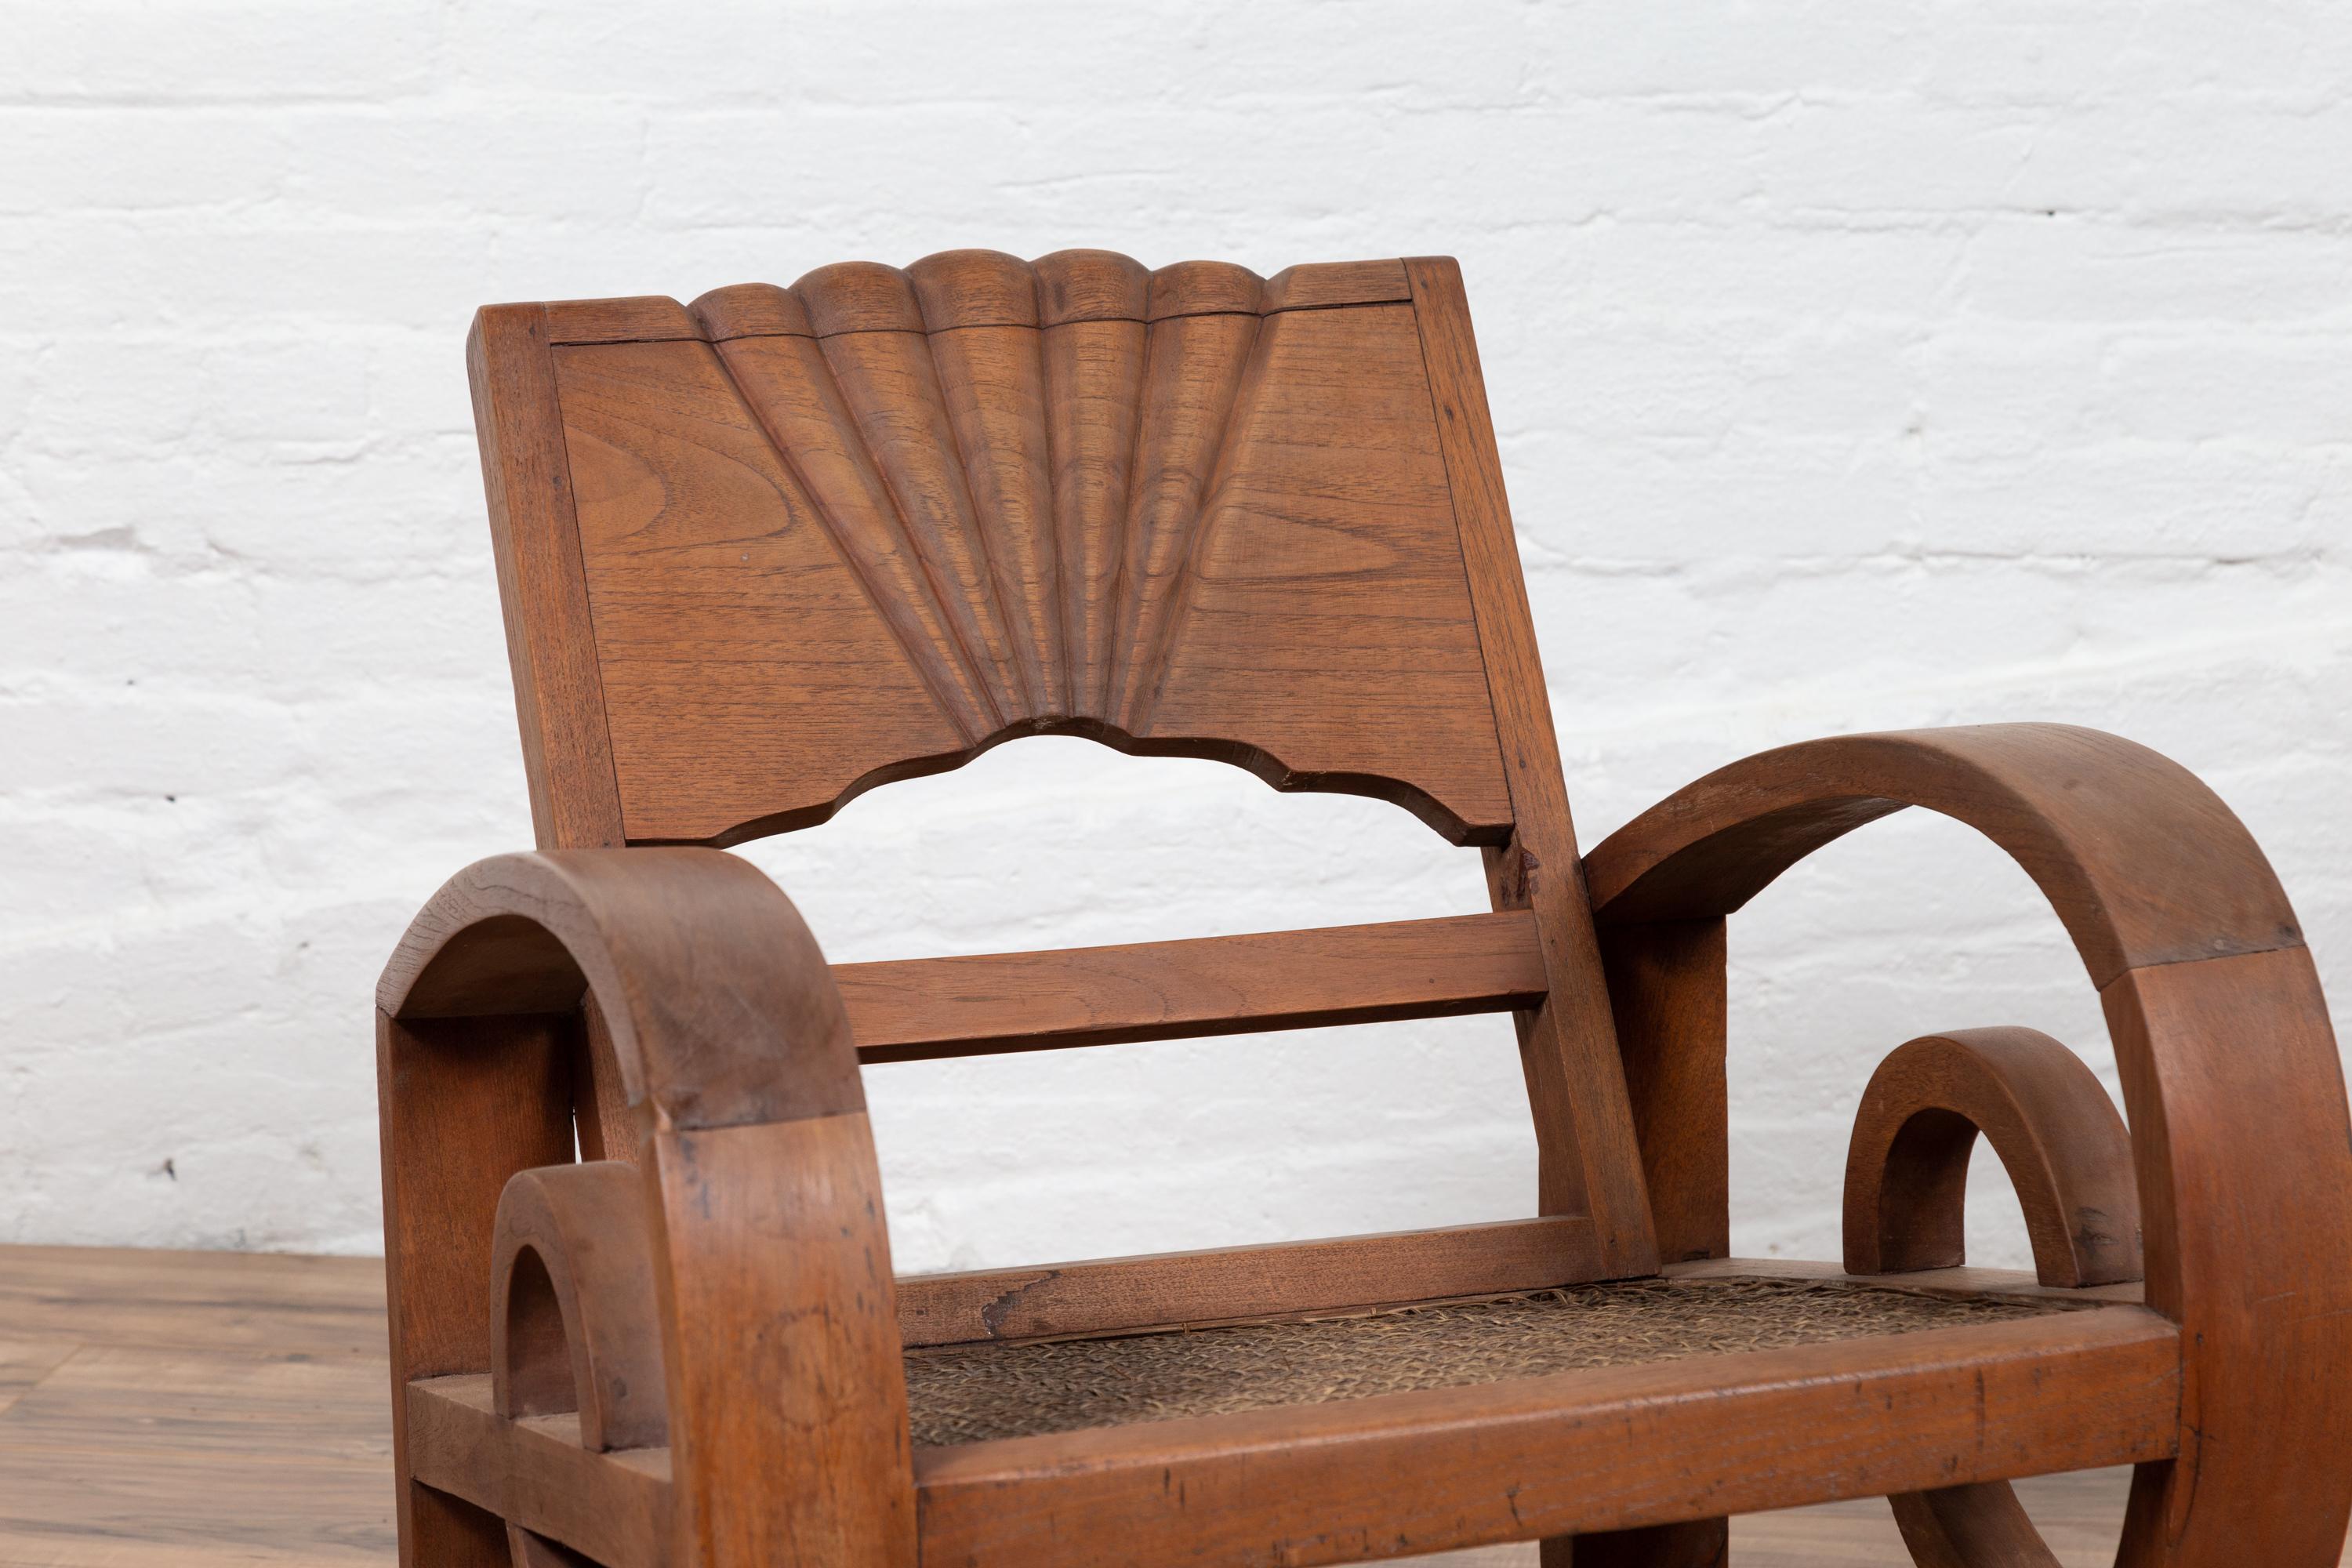 Indonesian Pair of Teak Wood Country Chairs from Madura with Rattan Seats and Looping Arms